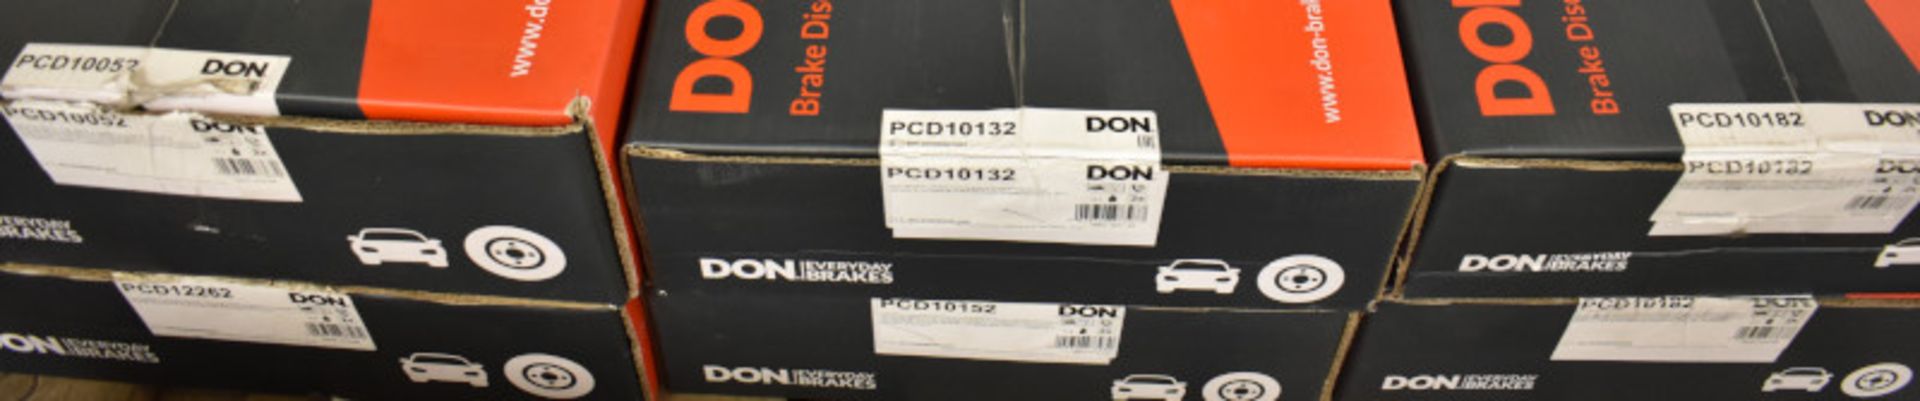 6x Don Brake Disc Sets - please see pictures for examples of make and model numbers - Image 2 of 2